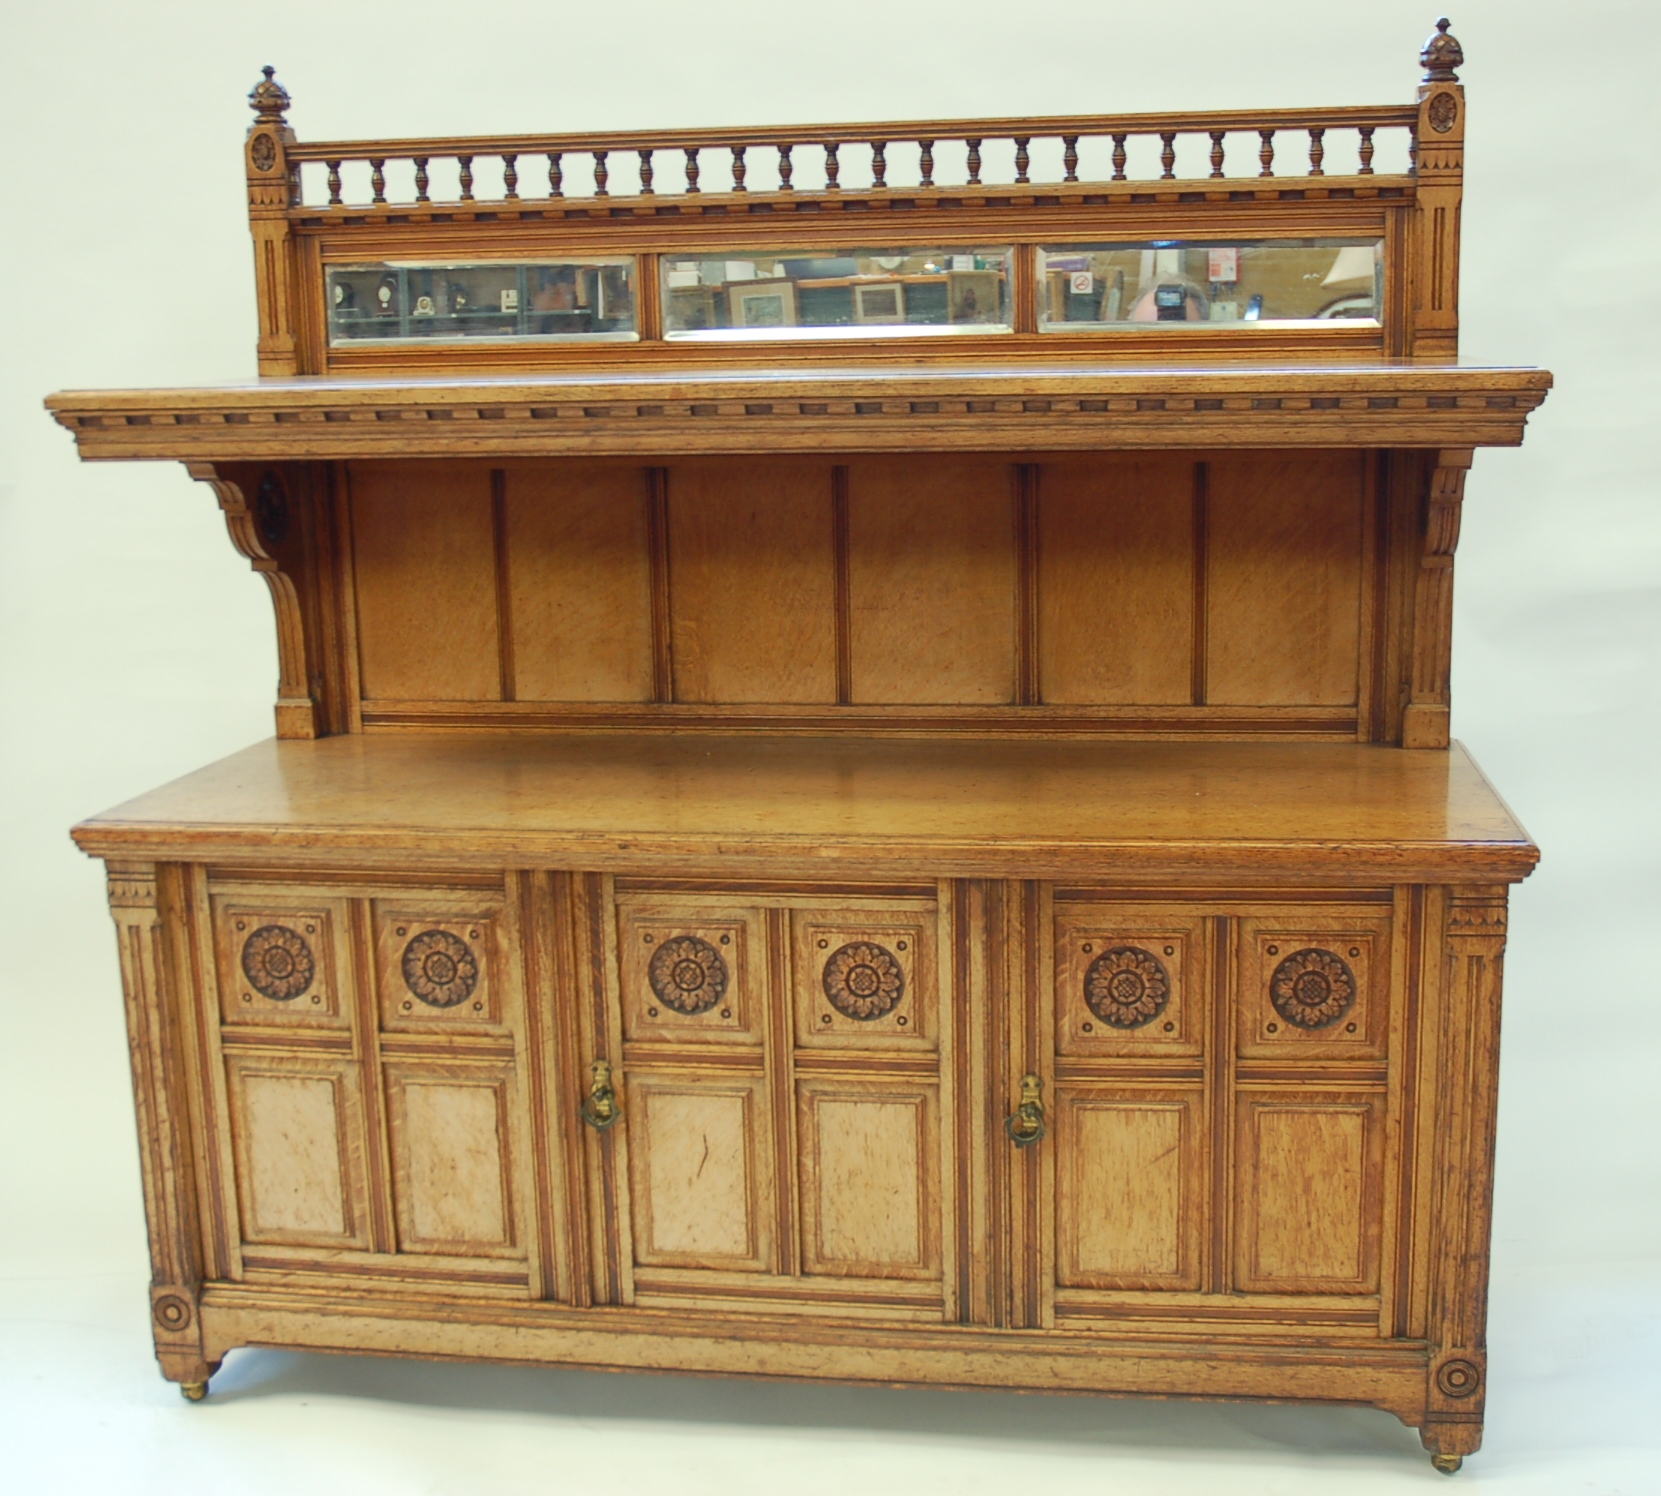 C. HINDLEY & SONS, 134 OXFORD STREET, LONDON, A LATE 19TH CENTURY OAK AESTHETIC MOVEMENT BUFFET-